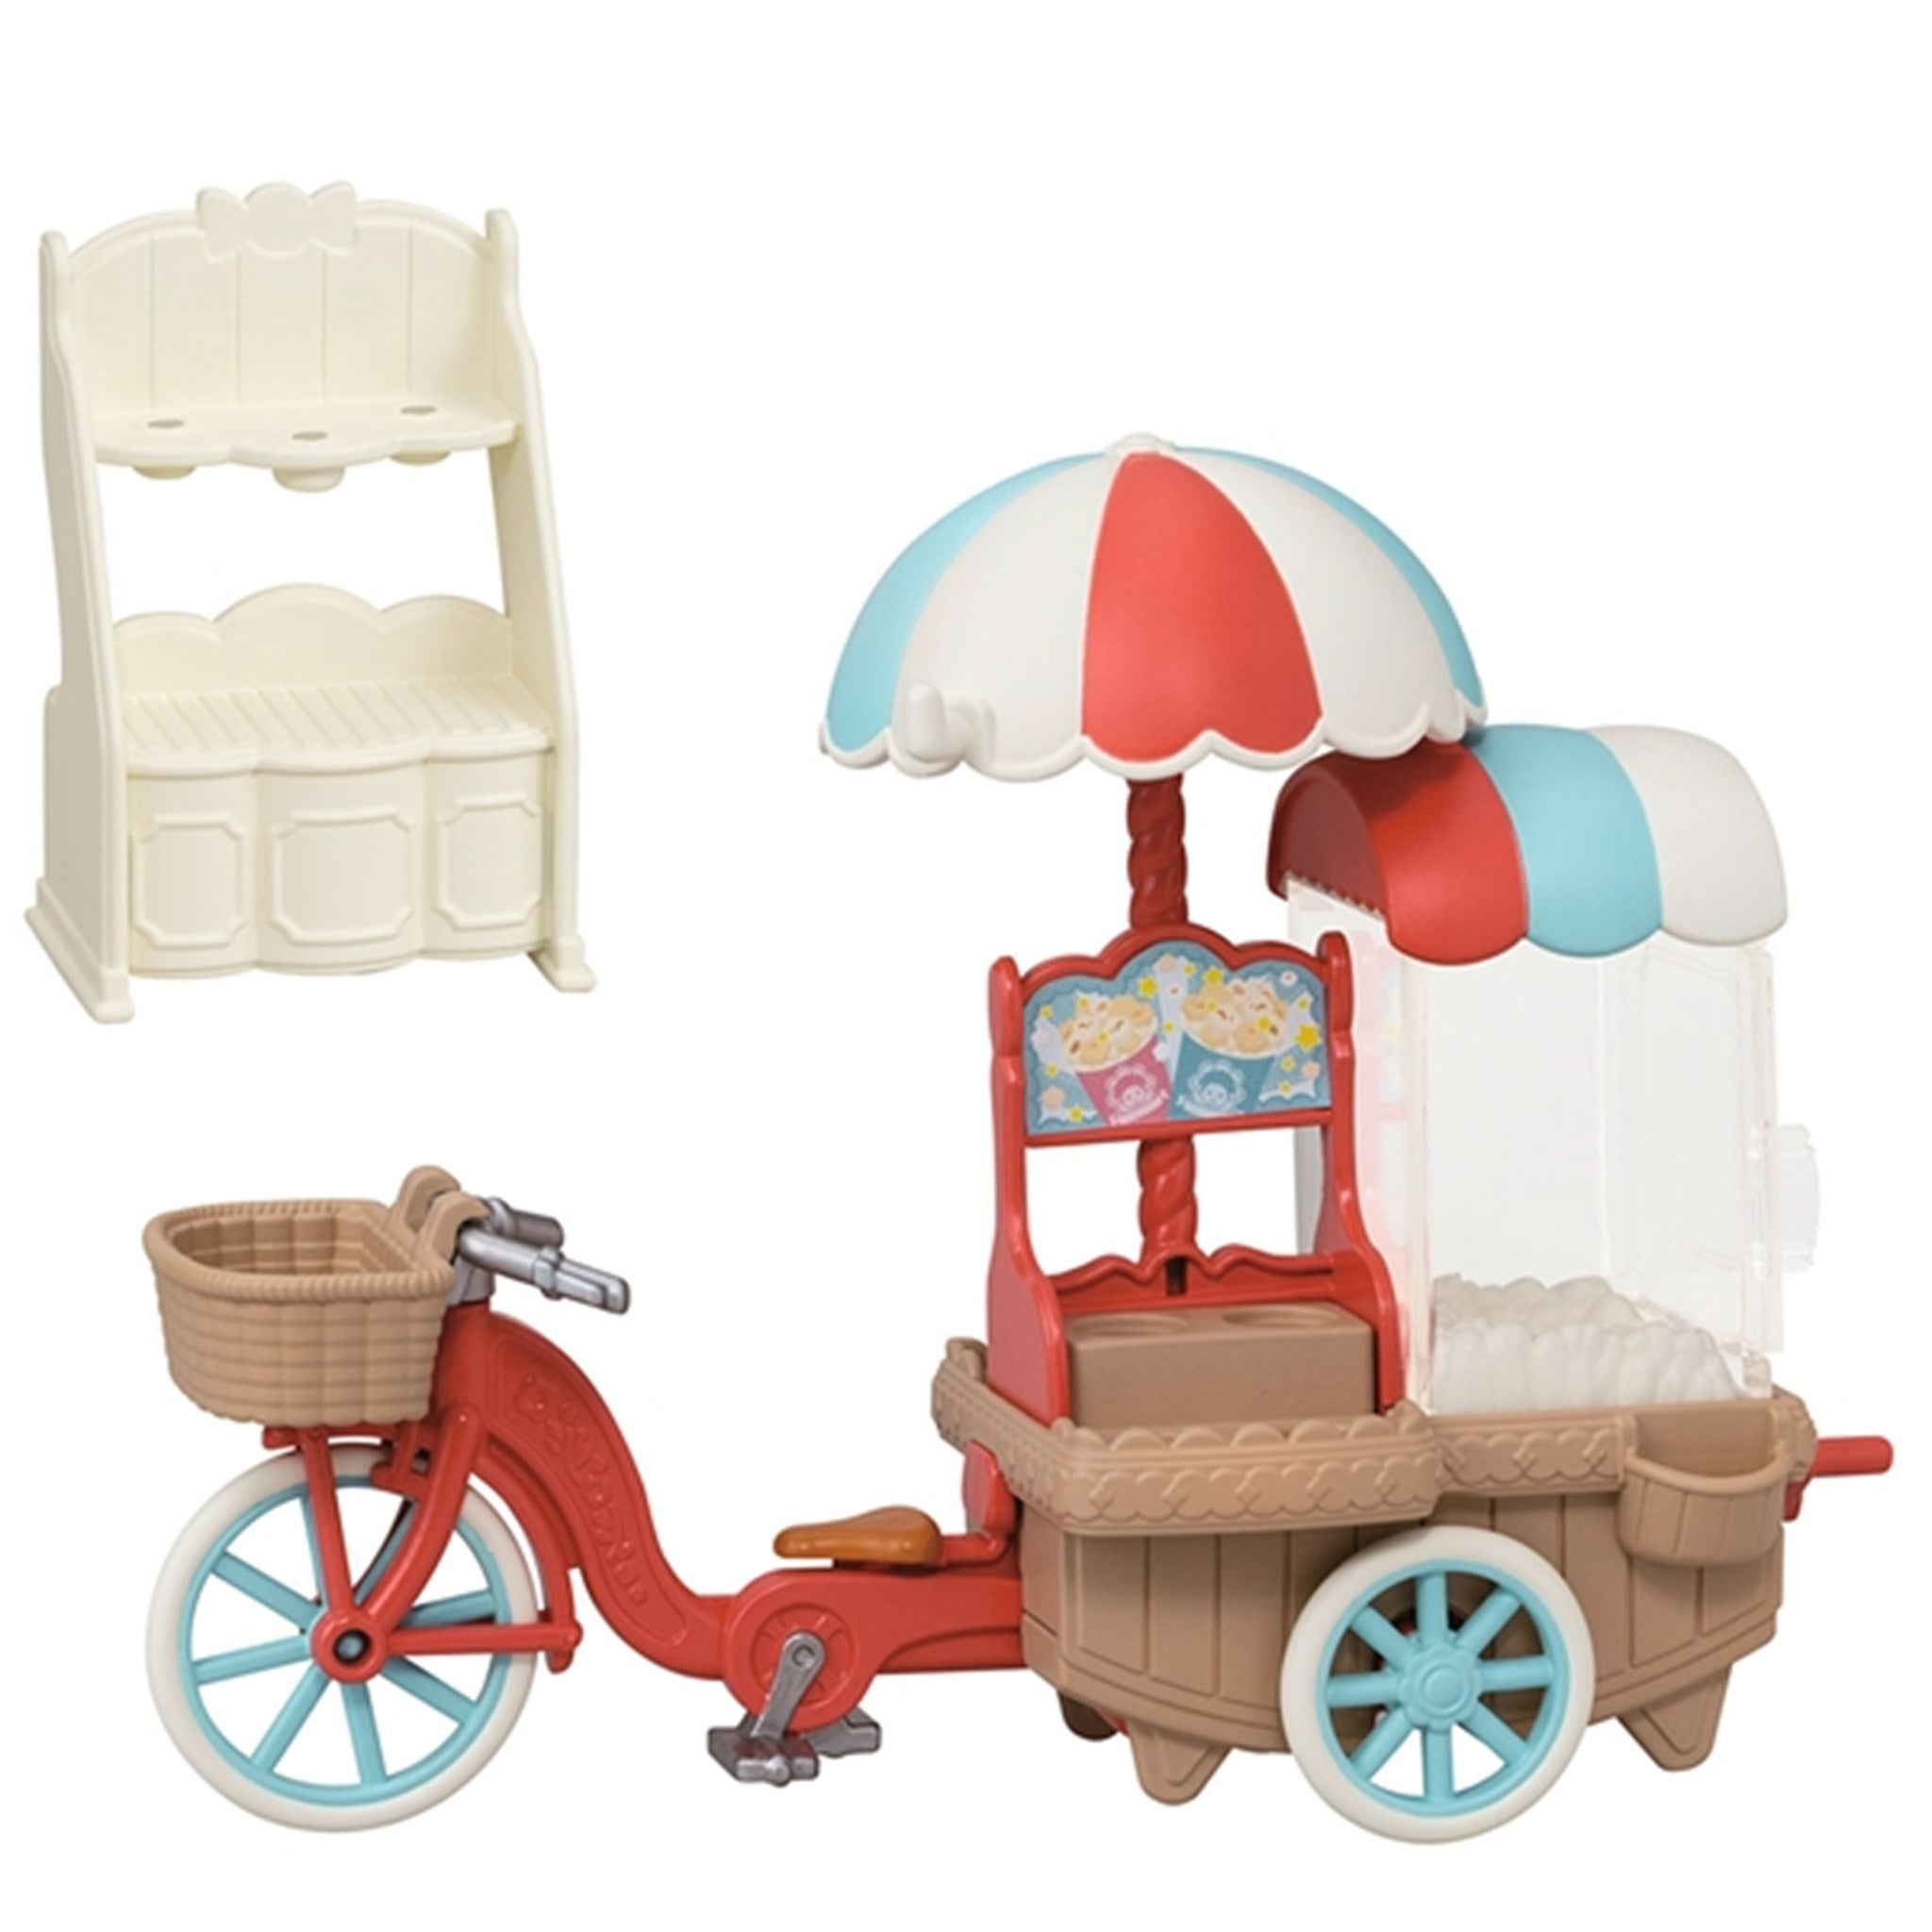 Sylvanian Families Popcorn Delivery Service With Figur 7